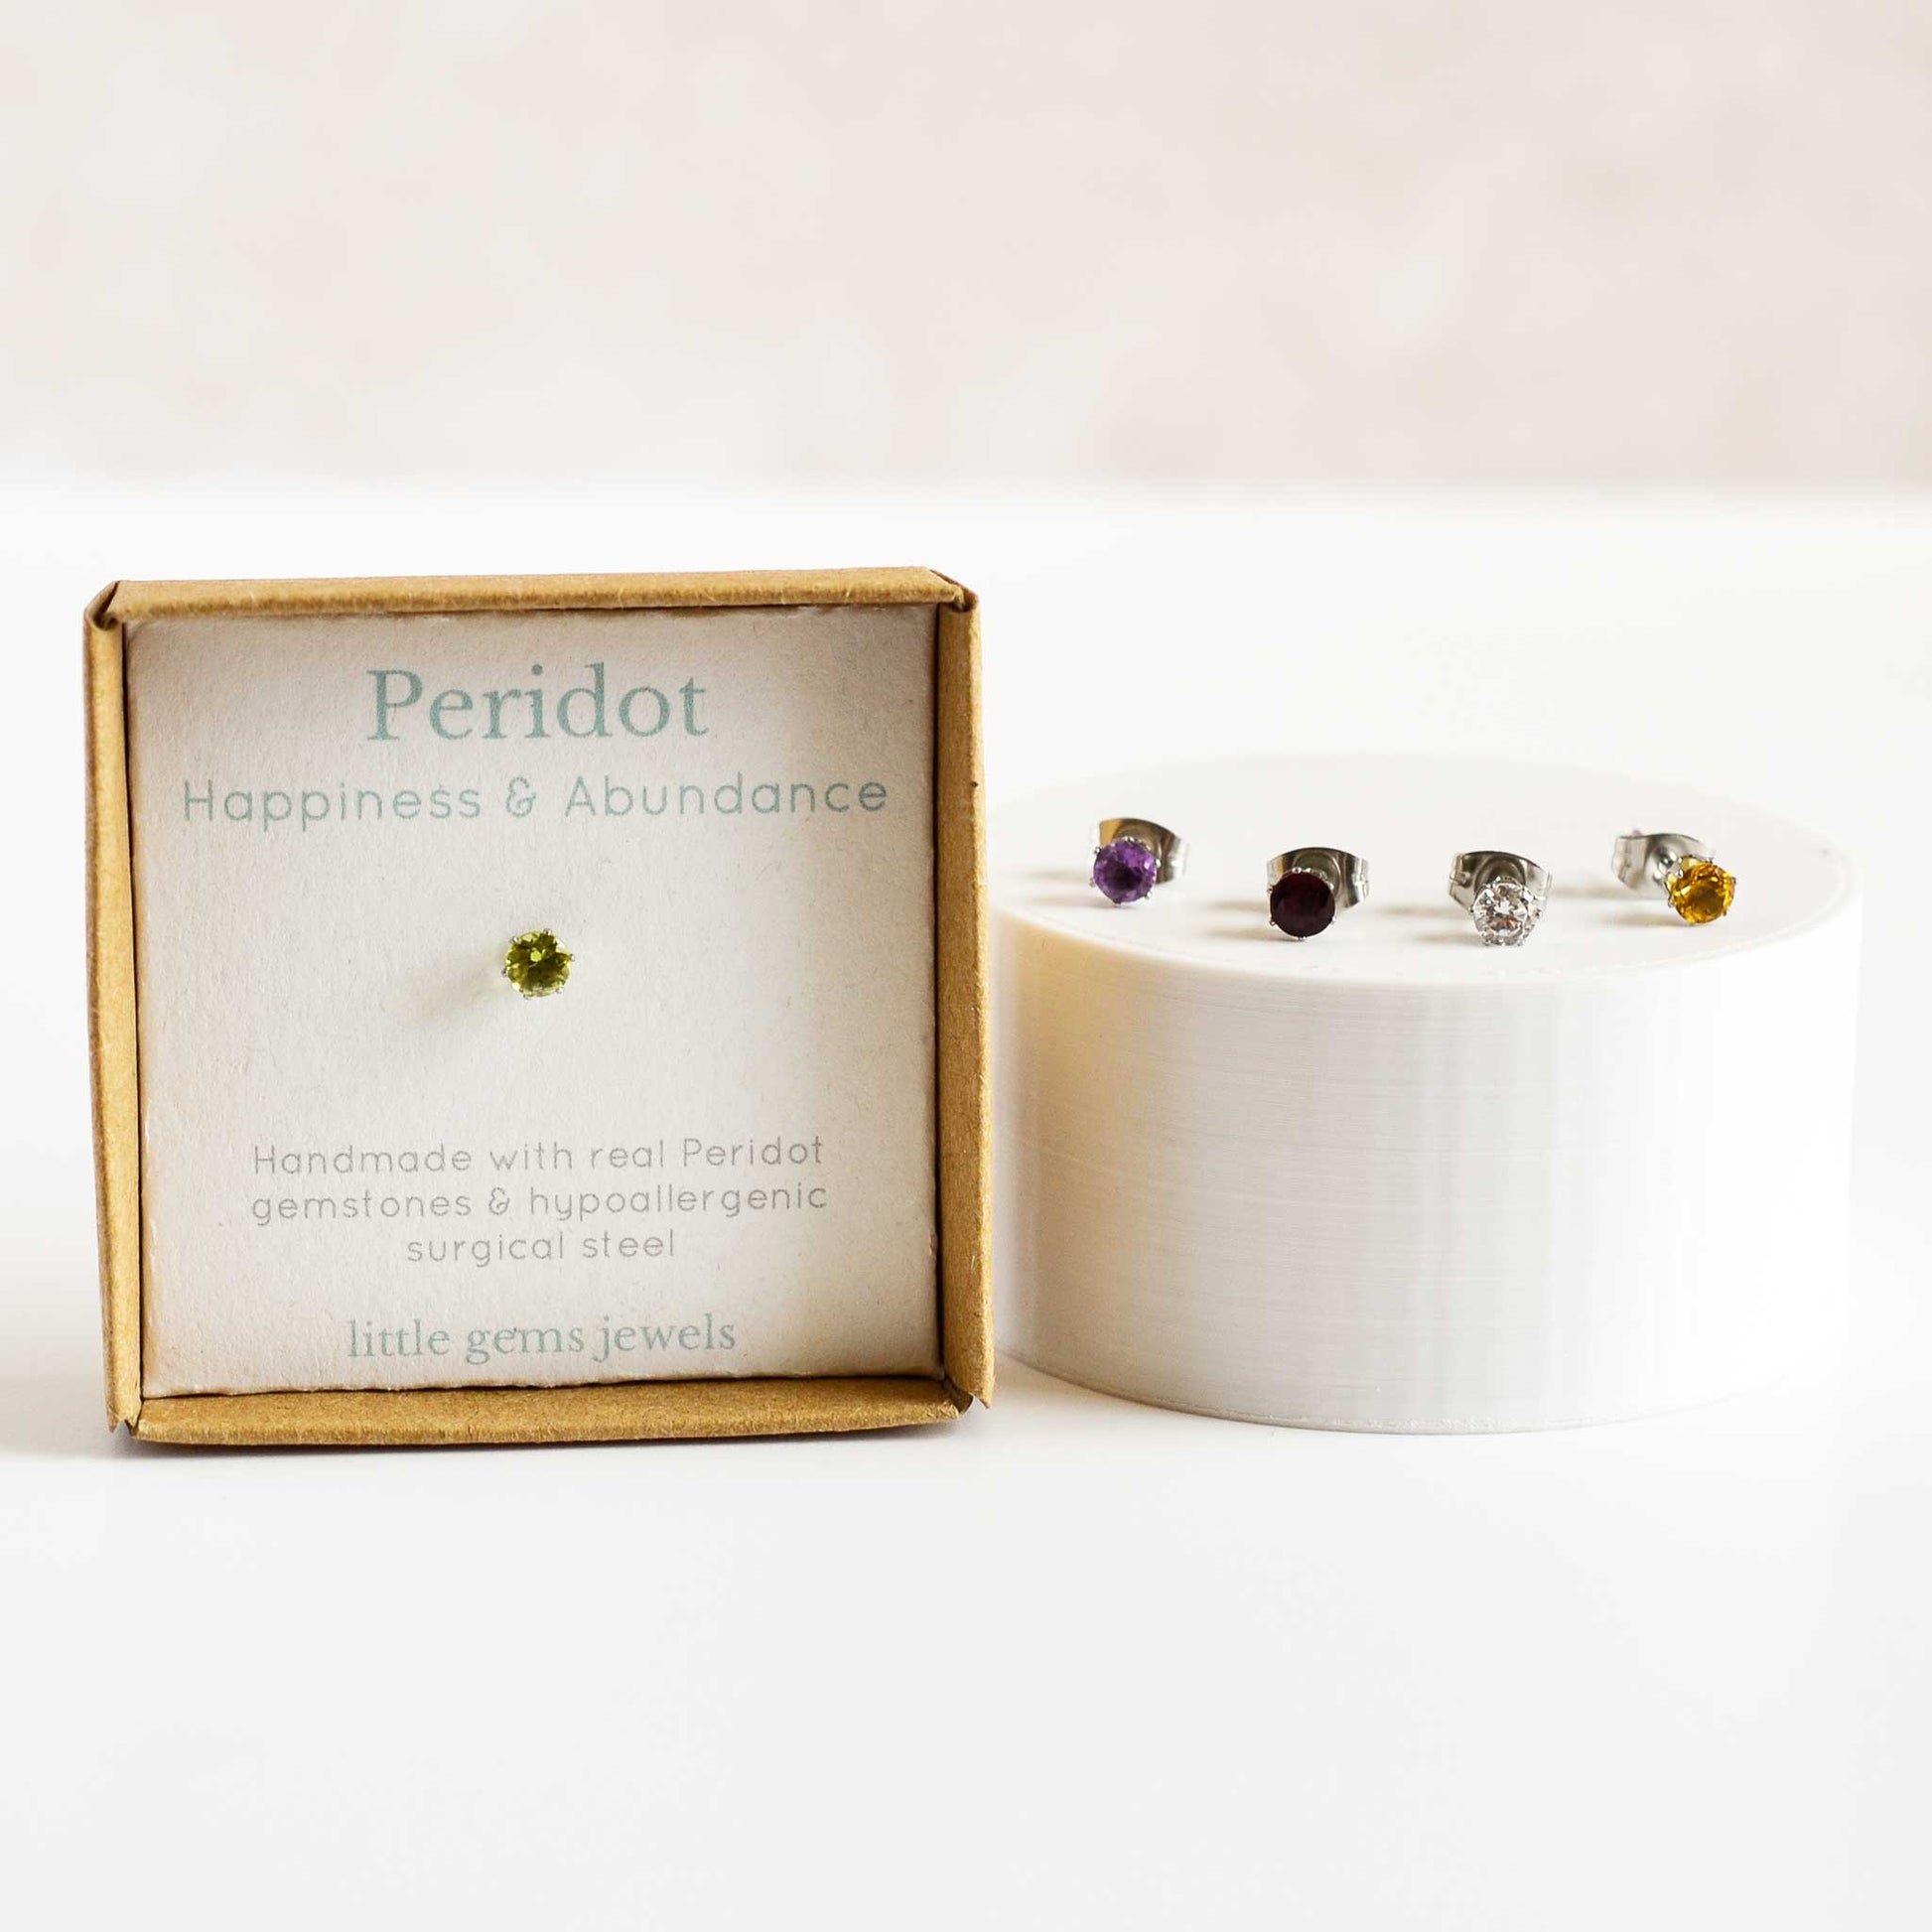 Single peridot gemstone earring in gift box with four different coloured stone studs by the side